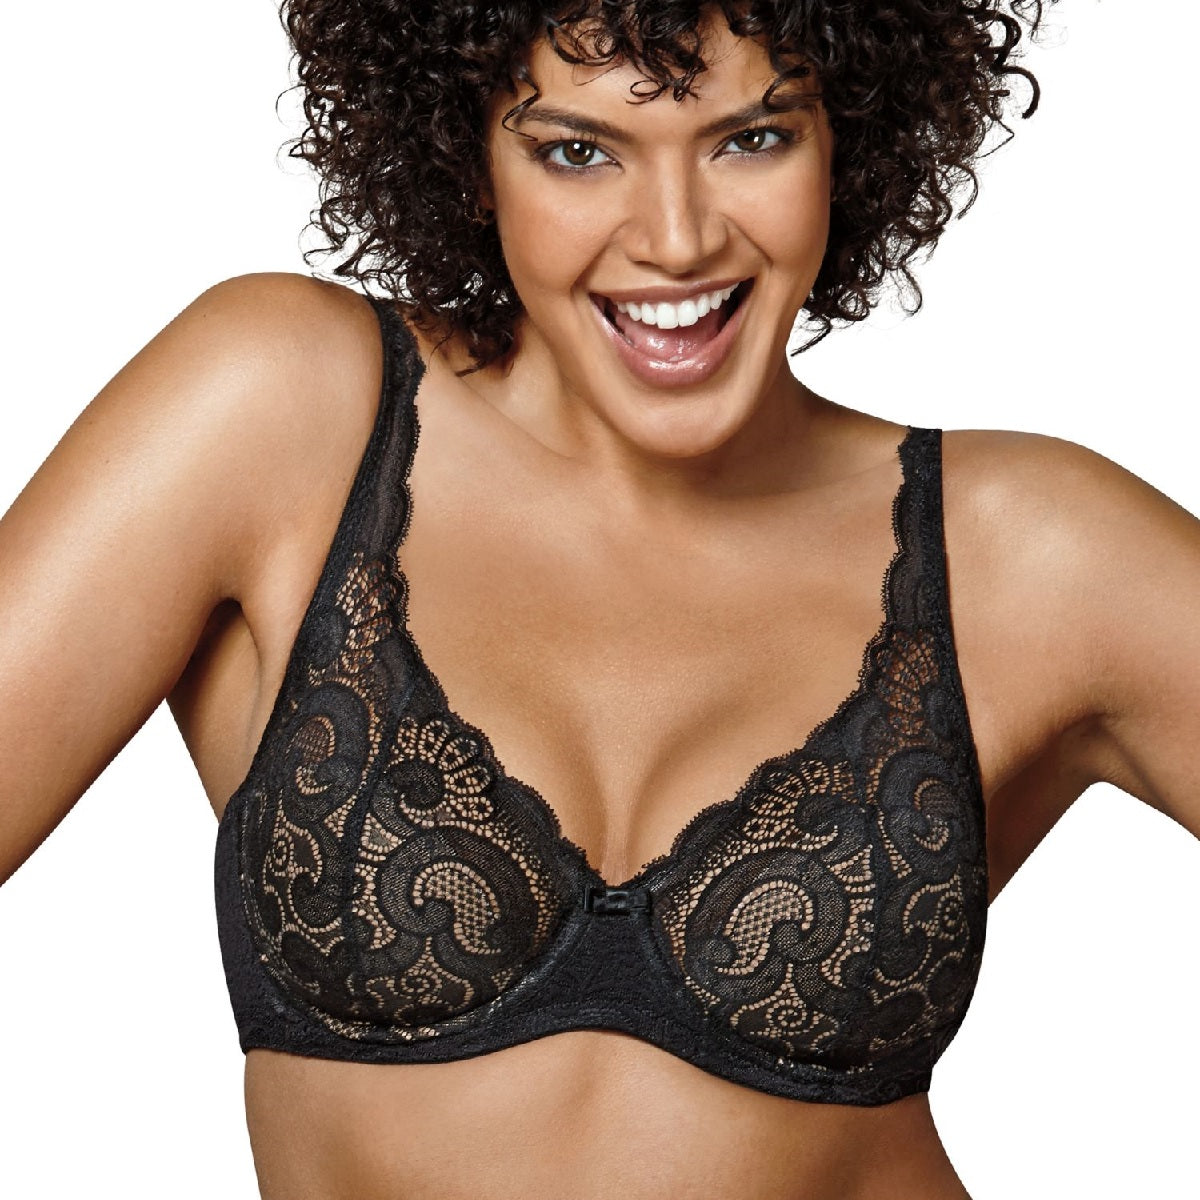 Rhonda Shear Ahh Bra 3-pack with Lace Inset – goSASS